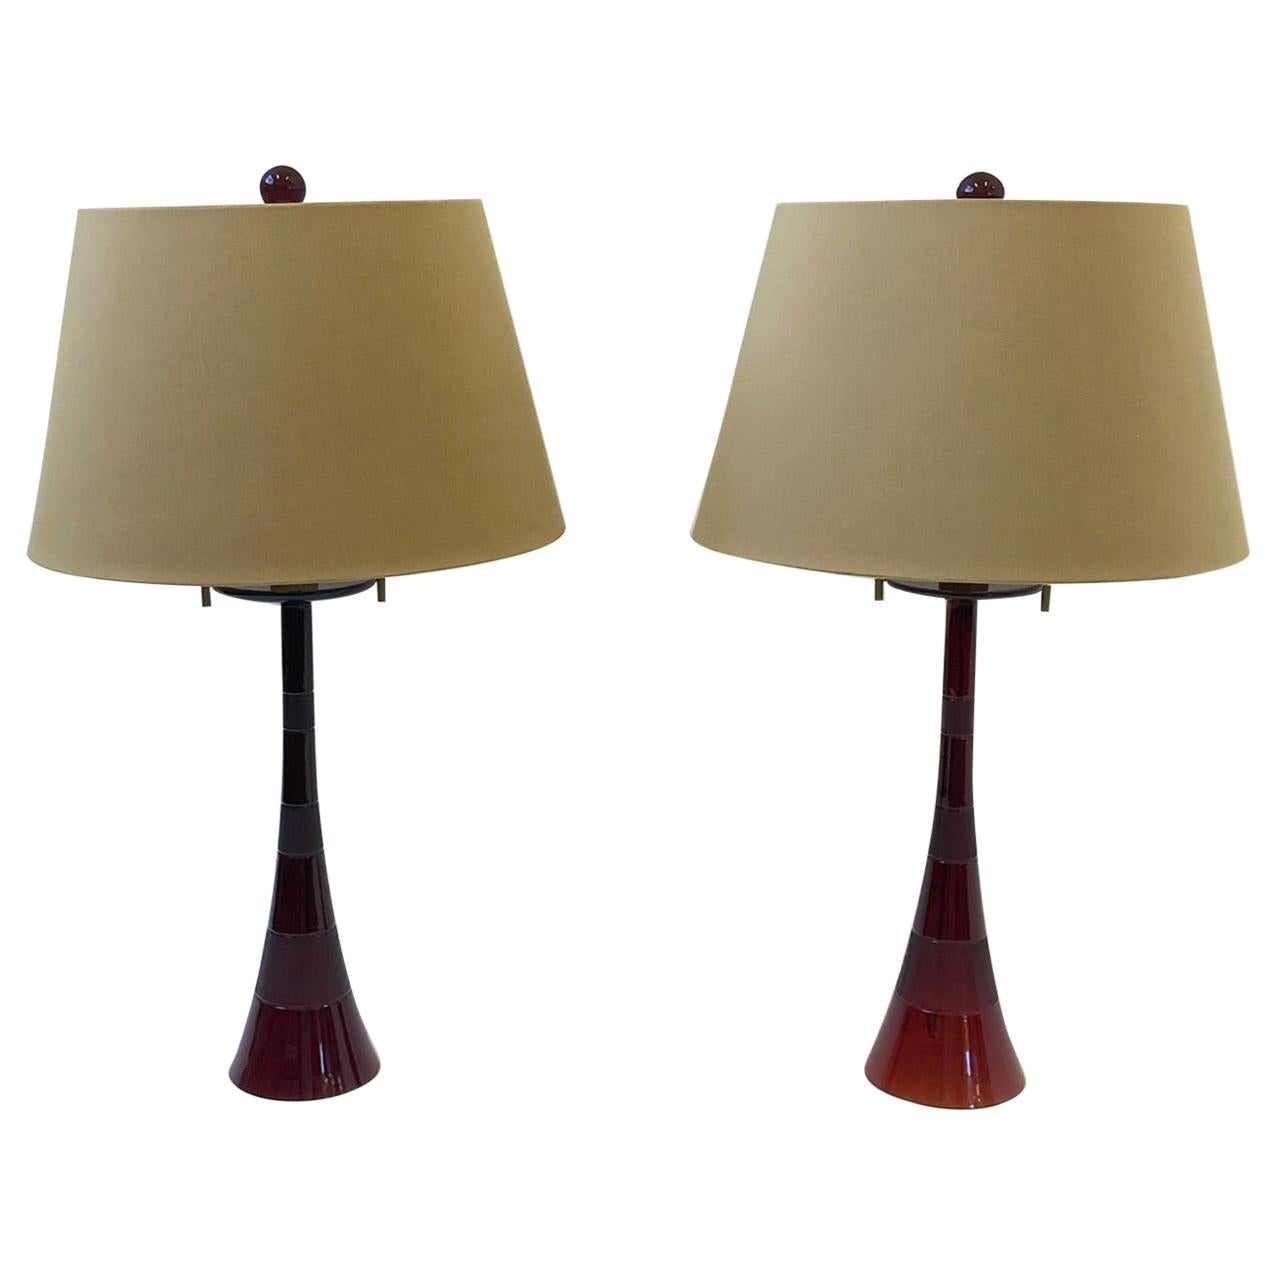 Pair of Italian Ruby Red Murano Glass and Brass Table Lamps by Donghia